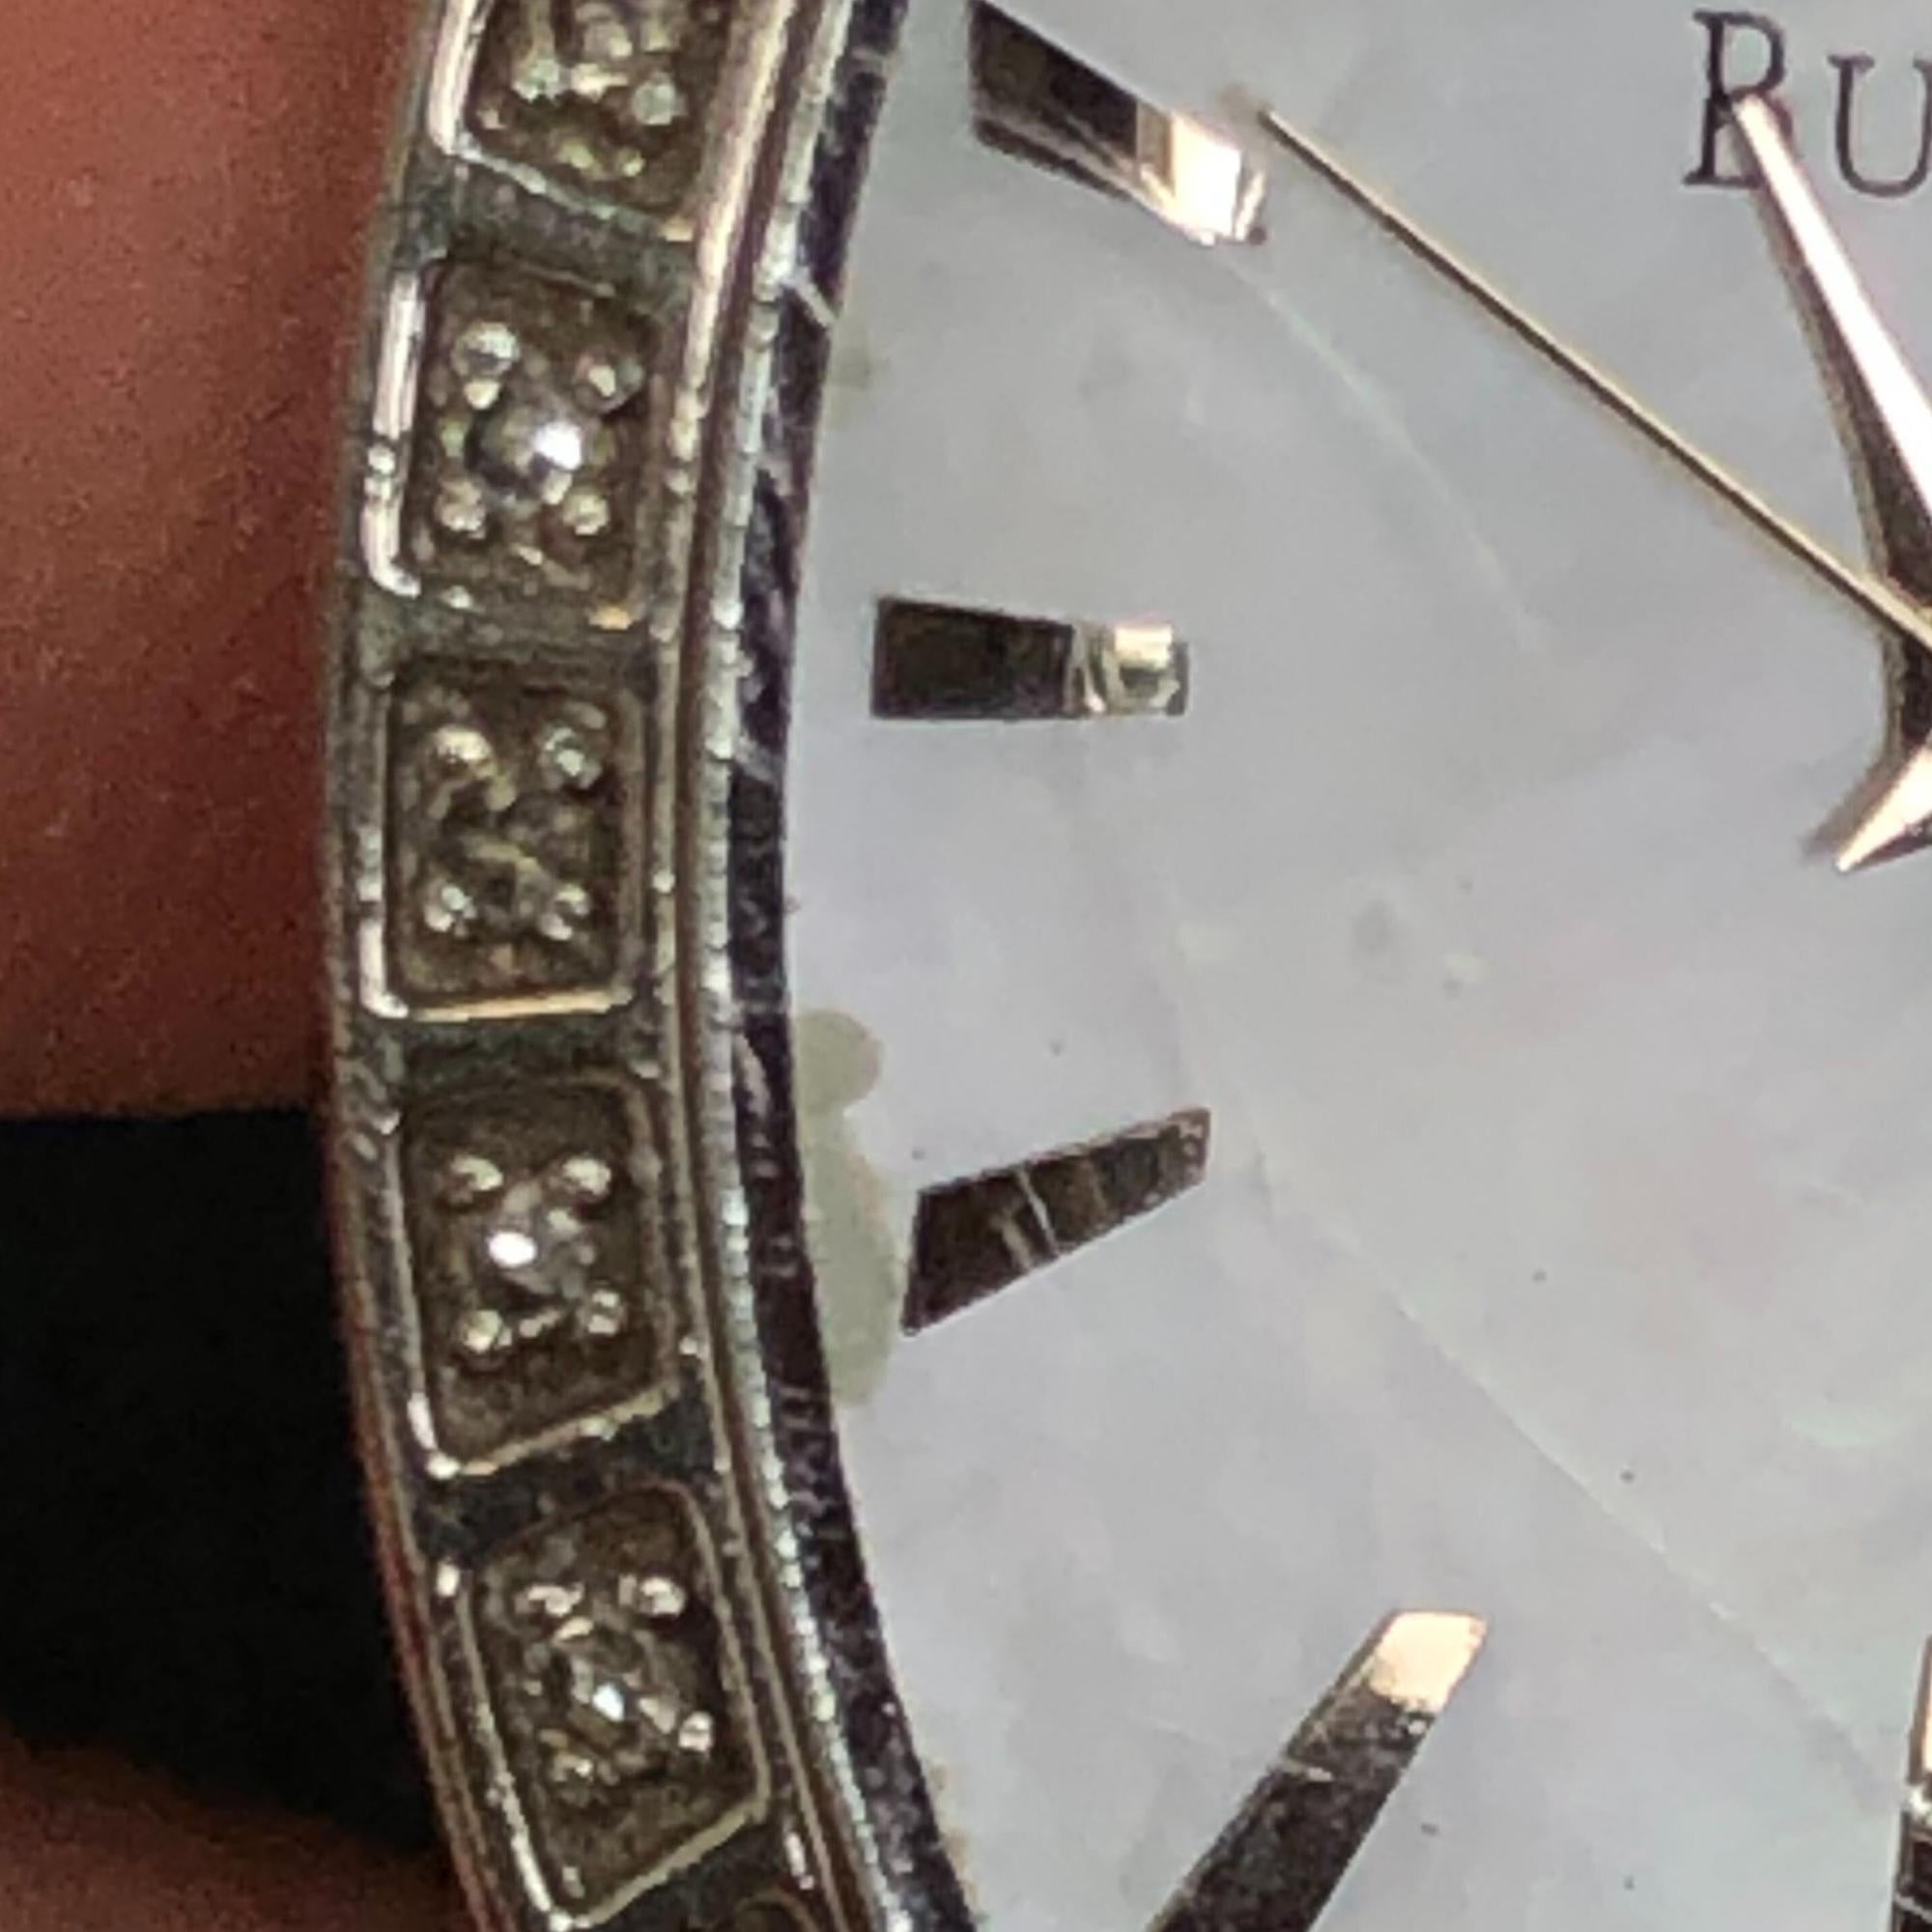 This timepiece is a preowned model. It has minor signs of water damage on the edges of the dial and hairline scratches on the crystal as depicted in pics. Missing hanging Tags.Comes with original Box and papers.Series:DiamondStyle:CasualCase: